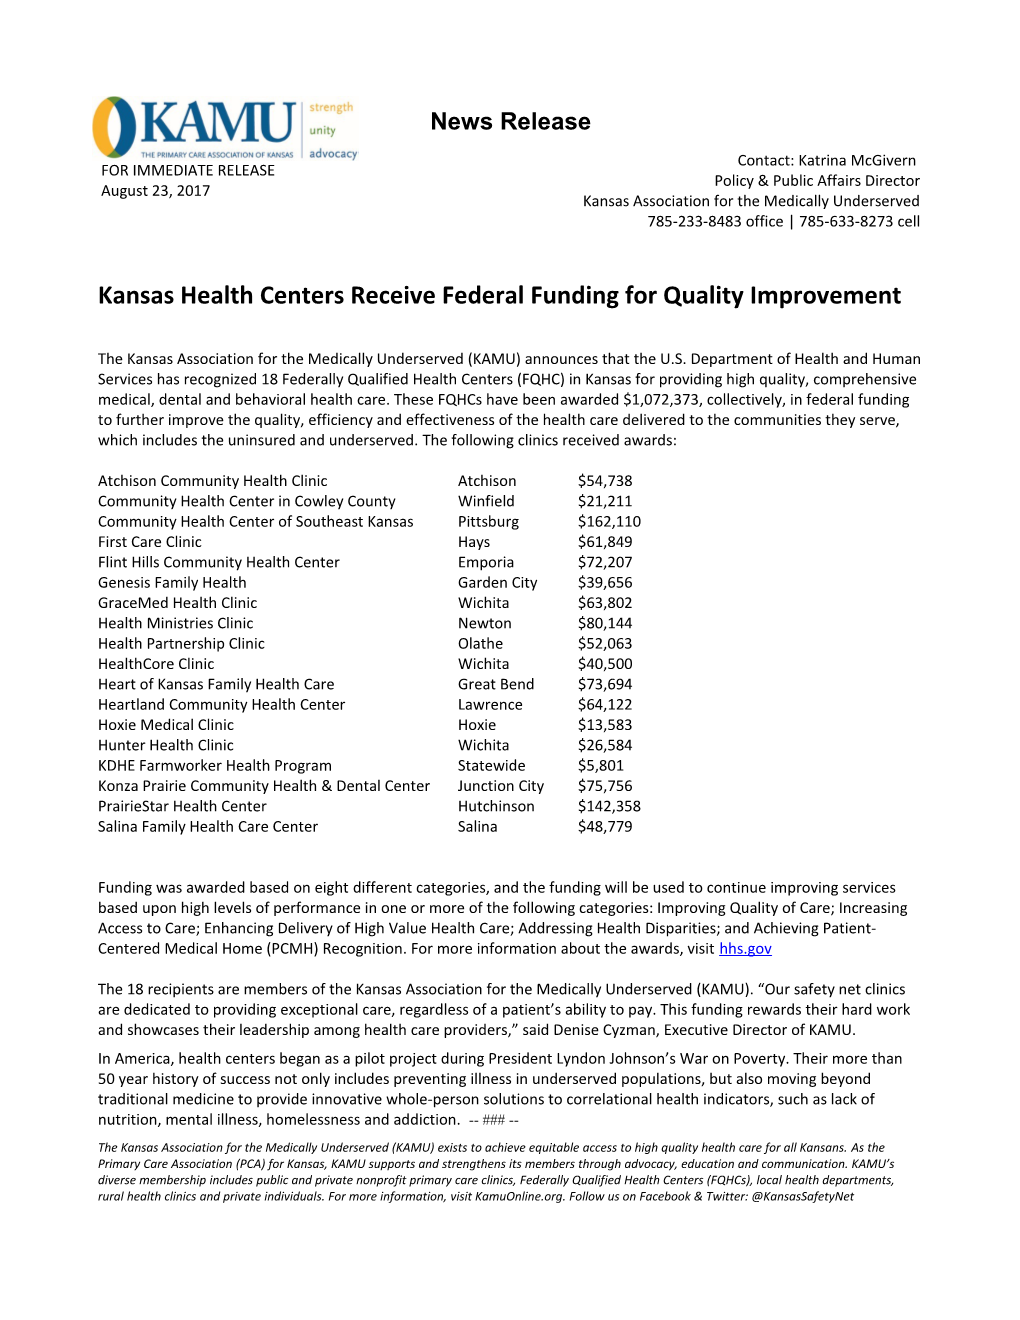 Kansas Health Centers Receive Federal Funding for Quality Improvement